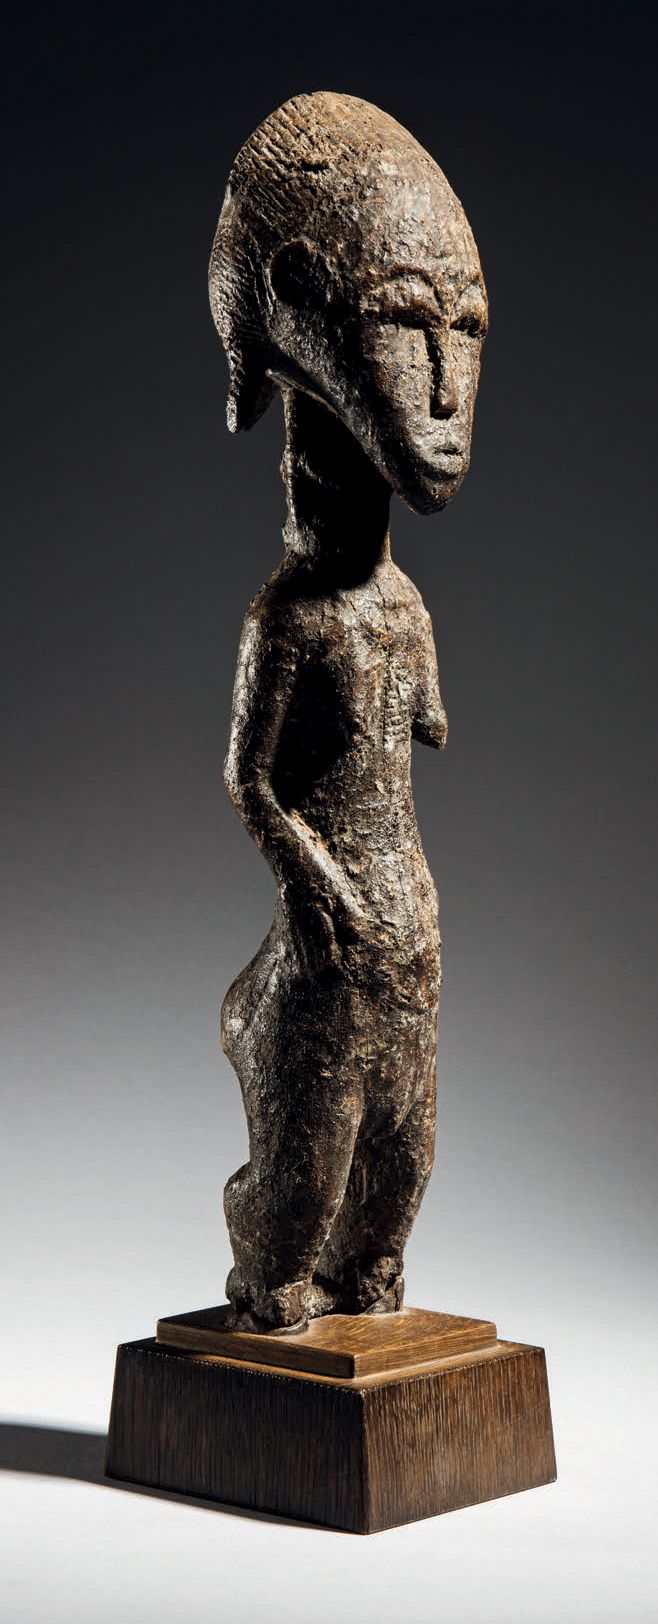 Null - BAULE STATUE, IVORY COAST
Wood
H. 39 cm
Representing a female figure with&hellip;